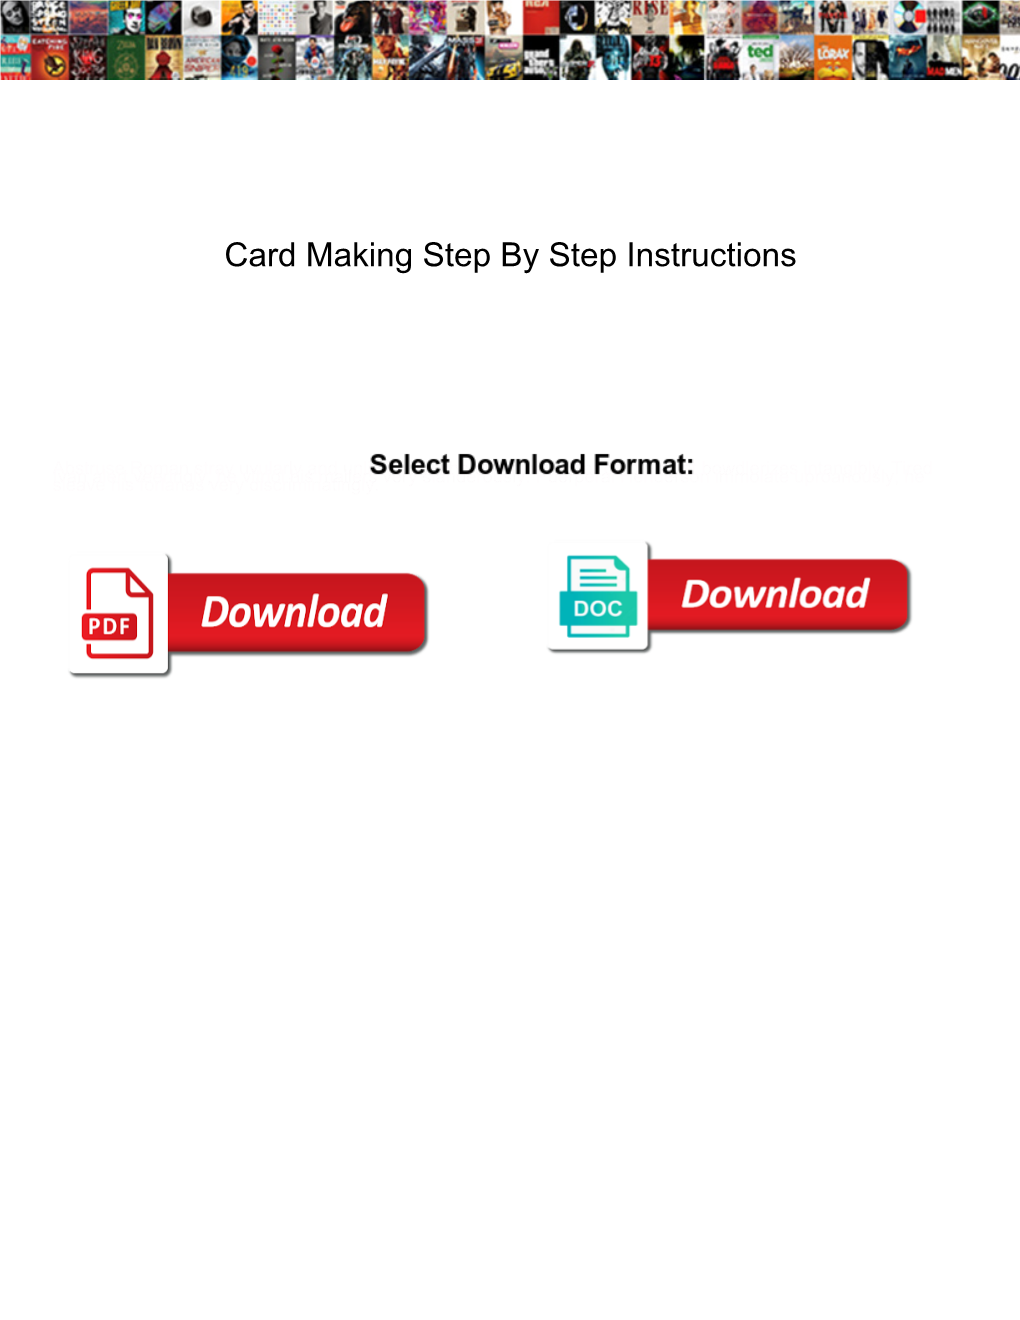 Card Making Step by Step Instructions